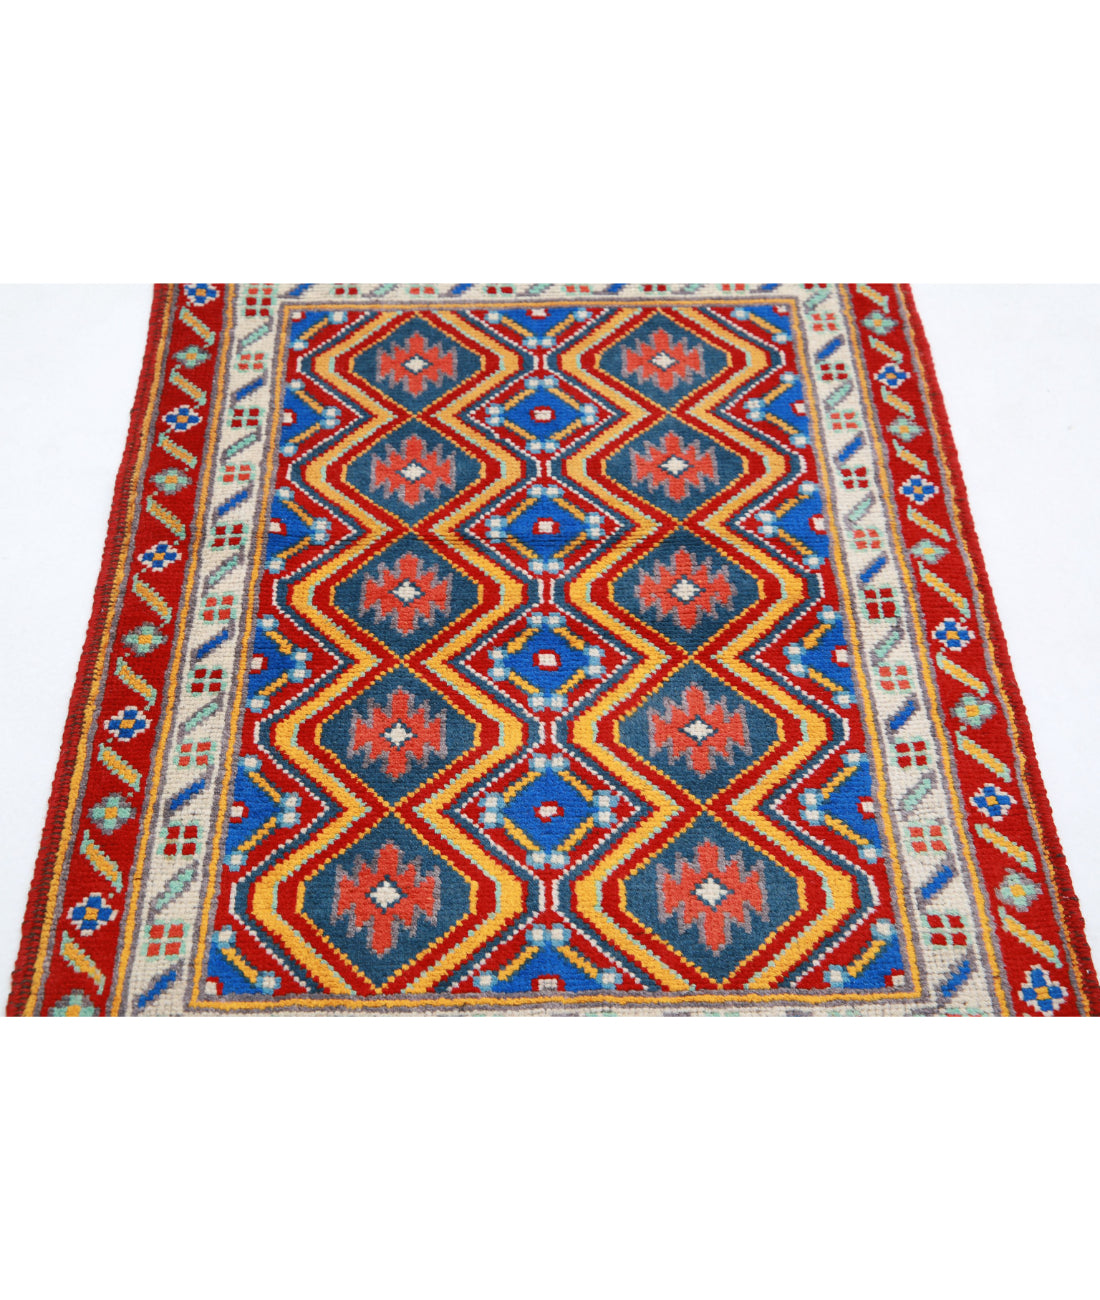 Revival 2'9'' X 3'11'' Hand-Knotted Wool Rug 2'9'' x 3'11'' (83 X 118) / Multi / Red